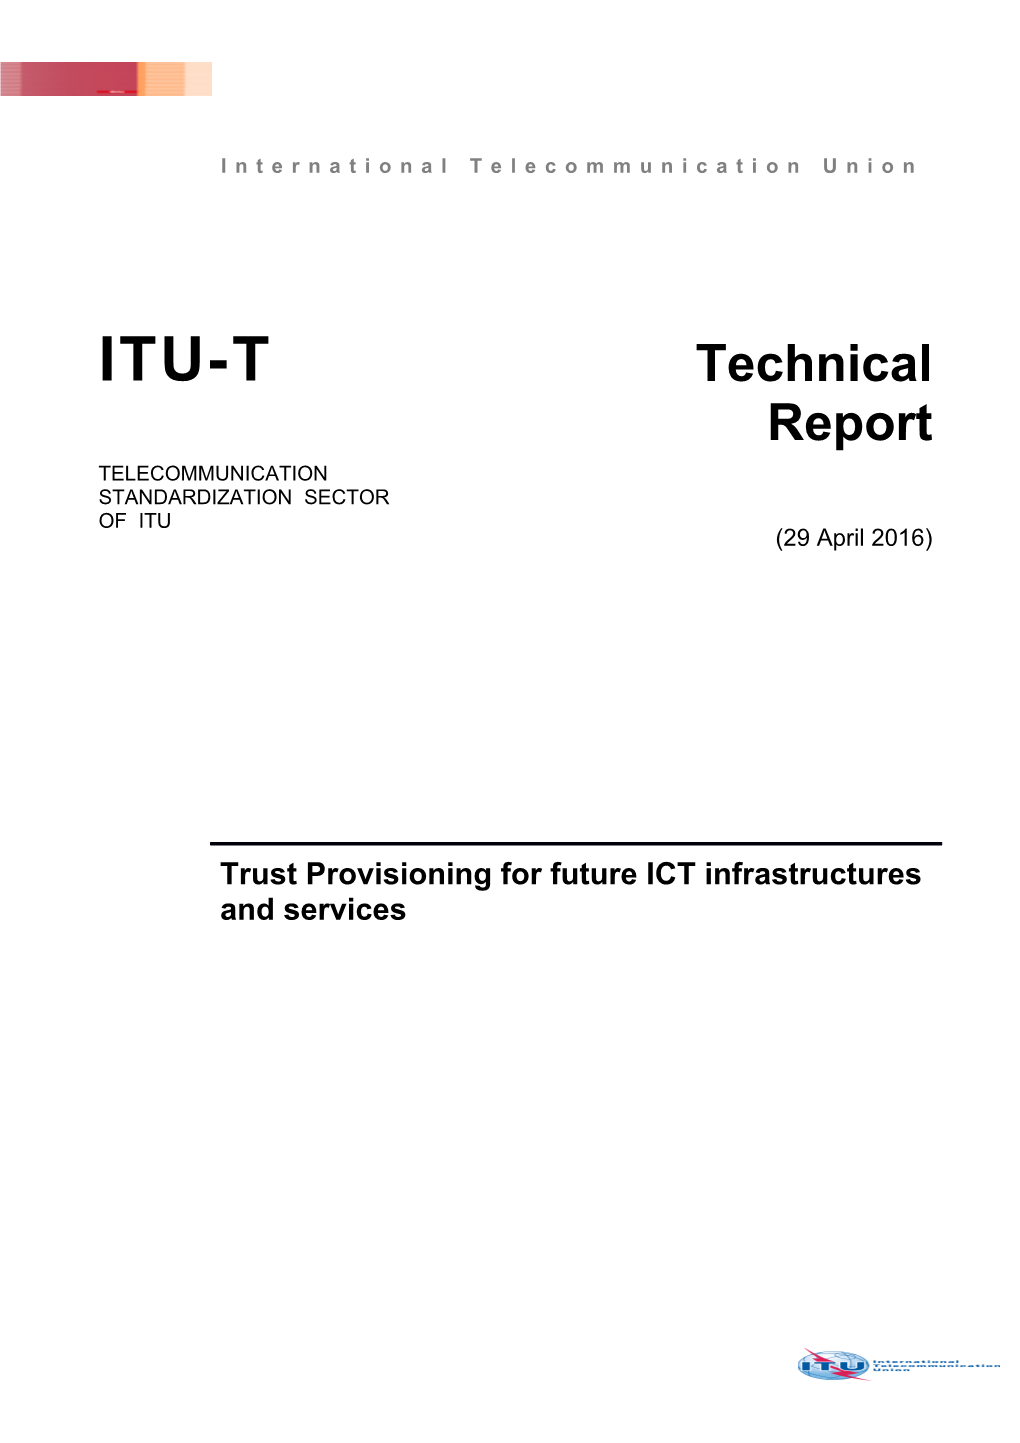 Trust Provisioning for Future ICT Infrastructures and Services